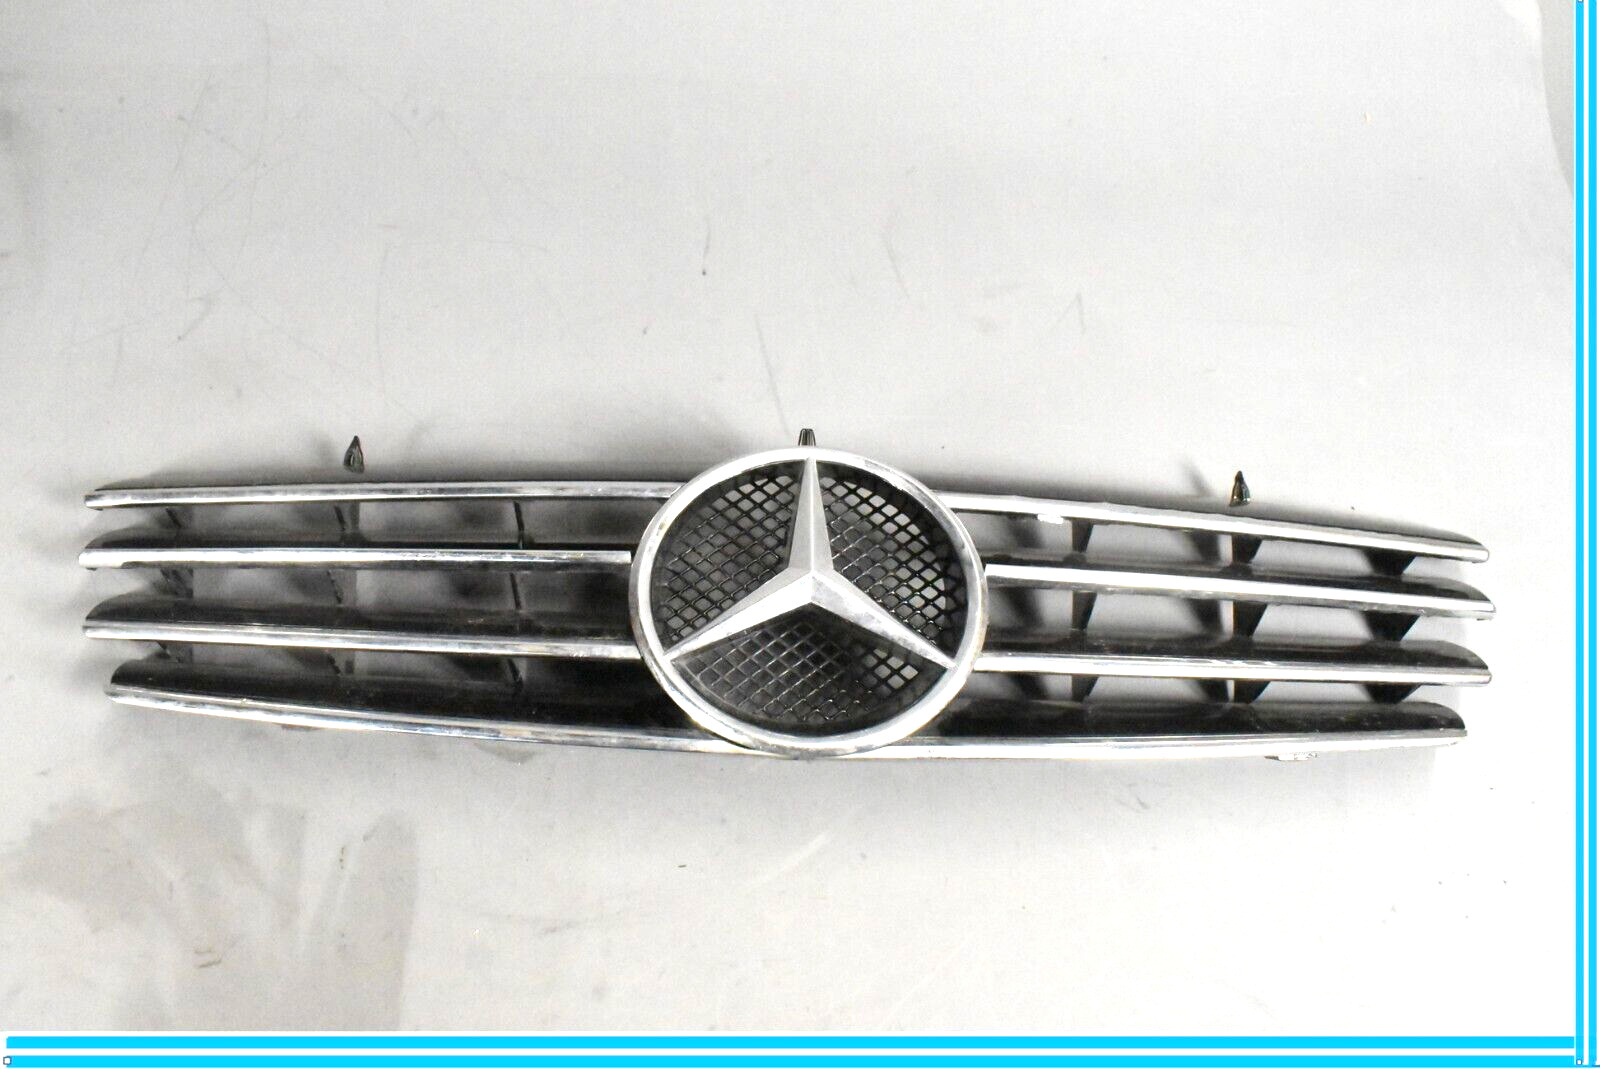 00-06 Mercedes W215 CL500 CL600 CL55 AMG Front Hood Radiator Grille Grill OEM